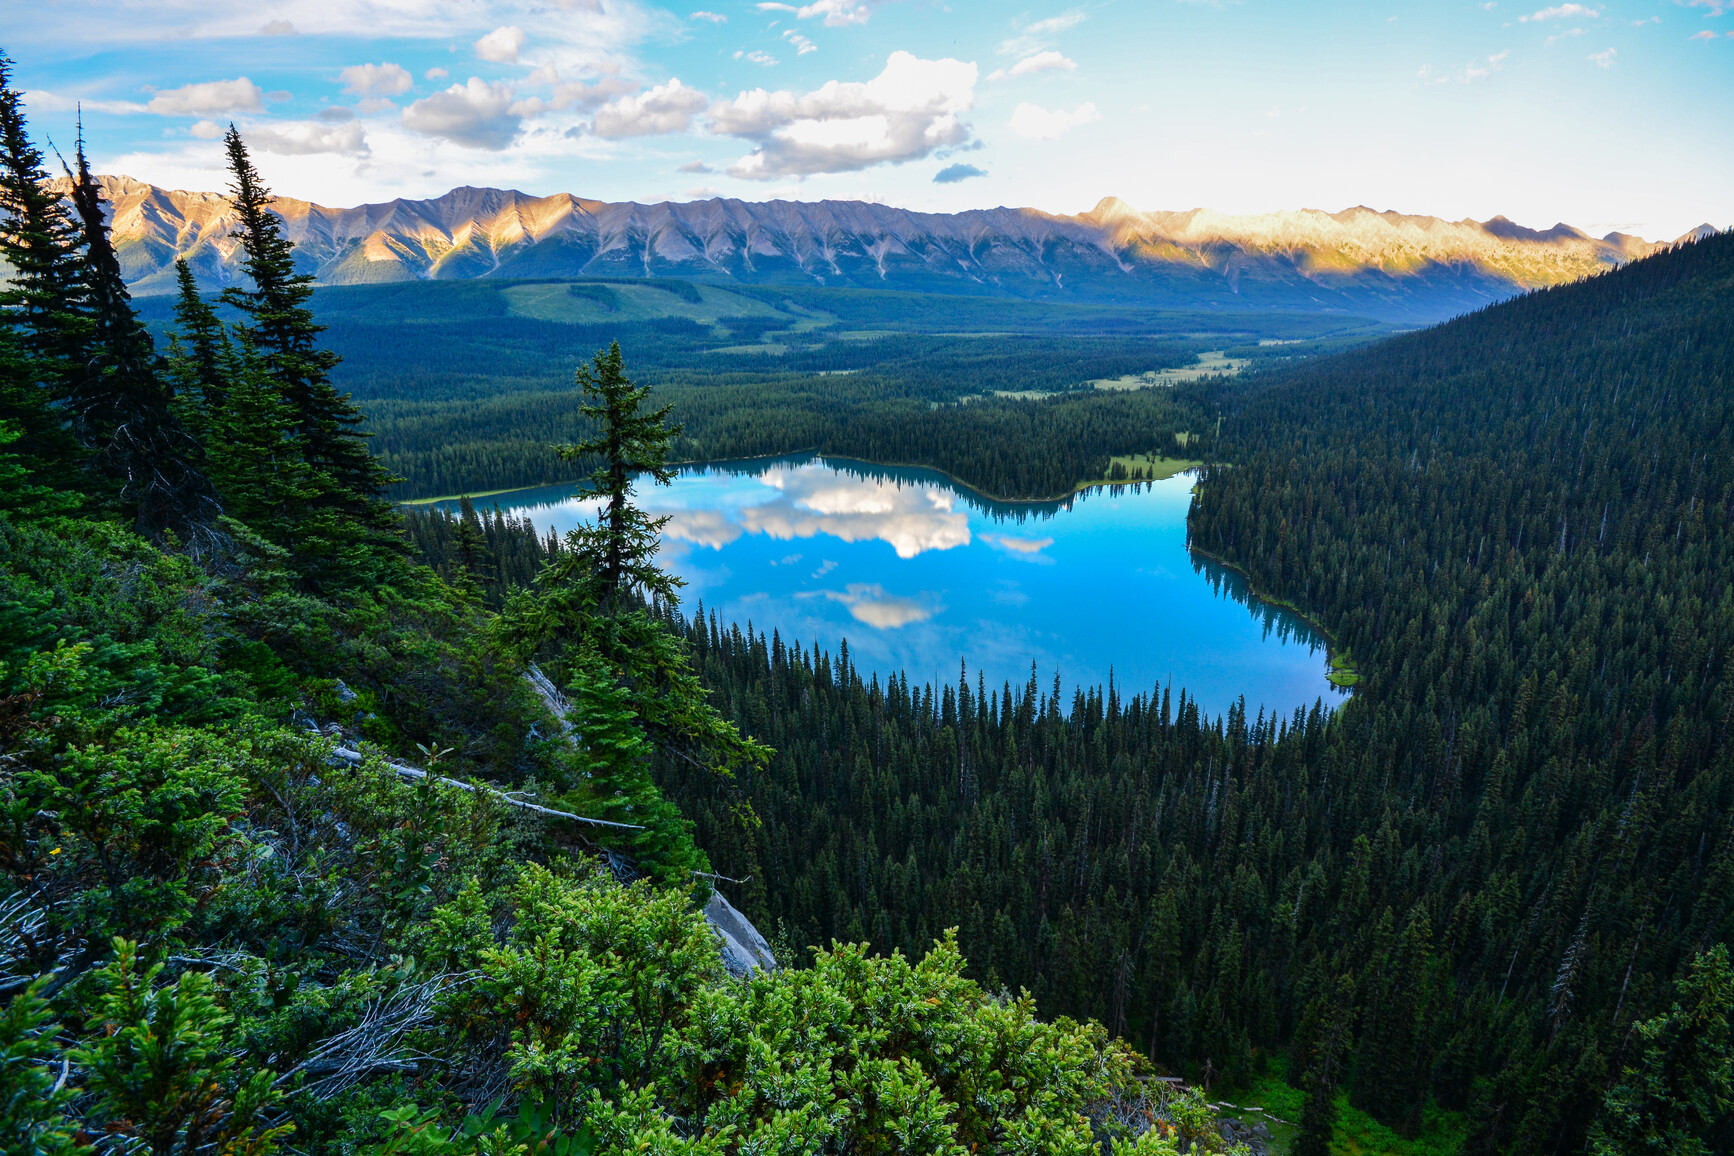 A view of Lower Elk Lake and the forested mountain valley from a slope above. The sun casts a golden glow on the mountains in the distance.